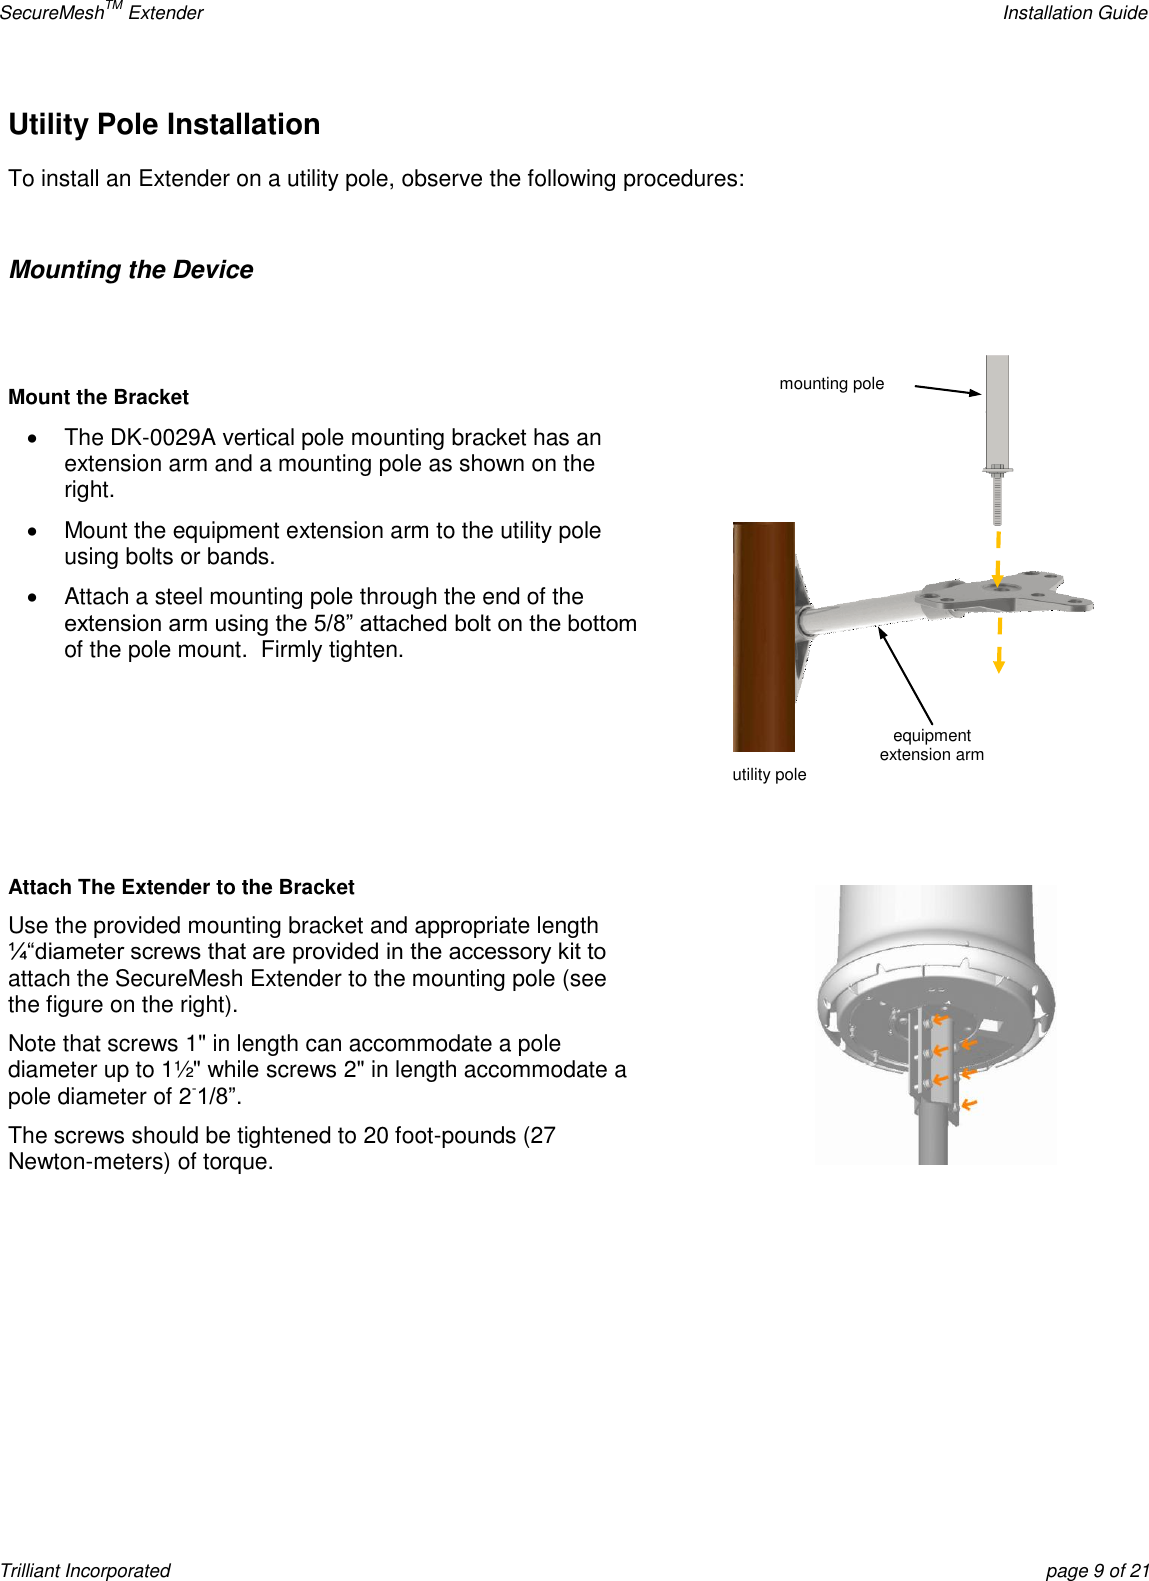 SecureMeshTM Extender    Installation Guide Trilliant Incorporated  page 9 of 21 Utility Pole Installation  To install an Extender on a utility pole, observe the following procedures:  Mounting the Device   Mount the Bracket   The DK-0029A vertical pole mounting bracket has an extension arm and a mounting pole as shown on the right.    Mount the equipment extension arm to the utility pole using bolts or bands.   Attach a steel mounting pole through the end of the extension arm using the 5/8‖ attached bolt on the bottom of the pole mount.  Firmly tighten.     Attach The Extender to the Bracket Use the provided mounting bracket and appropriate length ¼―diameter screws that are provided in the accessory kit to attach the SecureMesh Extender to the mounting pole (see the figure on the right).   Note that screws 1&quot; in length can accommodate a pole diameter up to 1½&quot; while screws 2&quot; in length accommodate a pole diameter of 2-1/8‖. The screws should be tightened to 20 foot-pounds (27 Newton-meters) of torque.      equipment  extension arm utility pole mounting pole 